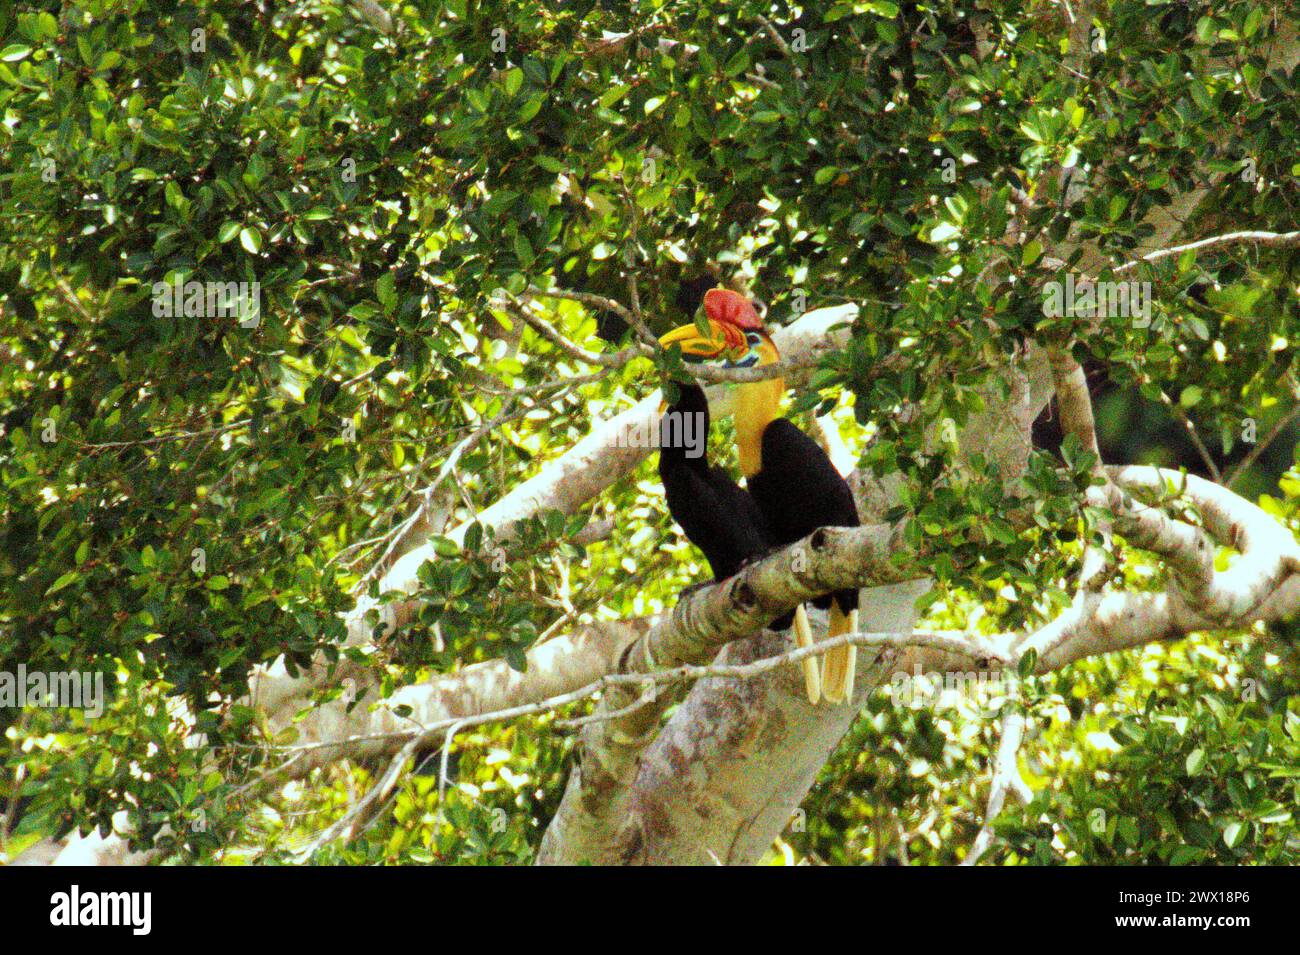 A pair of knobbed hornbills (Rhyticeros cassidix) perching on a tree branch in the shade in a vegetated area near Mount Tangkoko and Mount Duasudara (Dua Saudara) in Bitung, North Sulawesi, Indonesia. A report by a team of scientists led by Marine Joly, based on research conducted since 2012 to 2020, has revealed that the temperature is increasing by up to 0.2 degree Celsius per year in Tangkoko forest, and the overall fruit abundance is also decreased. 'Rising temperatures caused by climate change can disrupt the delicate balance of ecosystems. Stock Photo